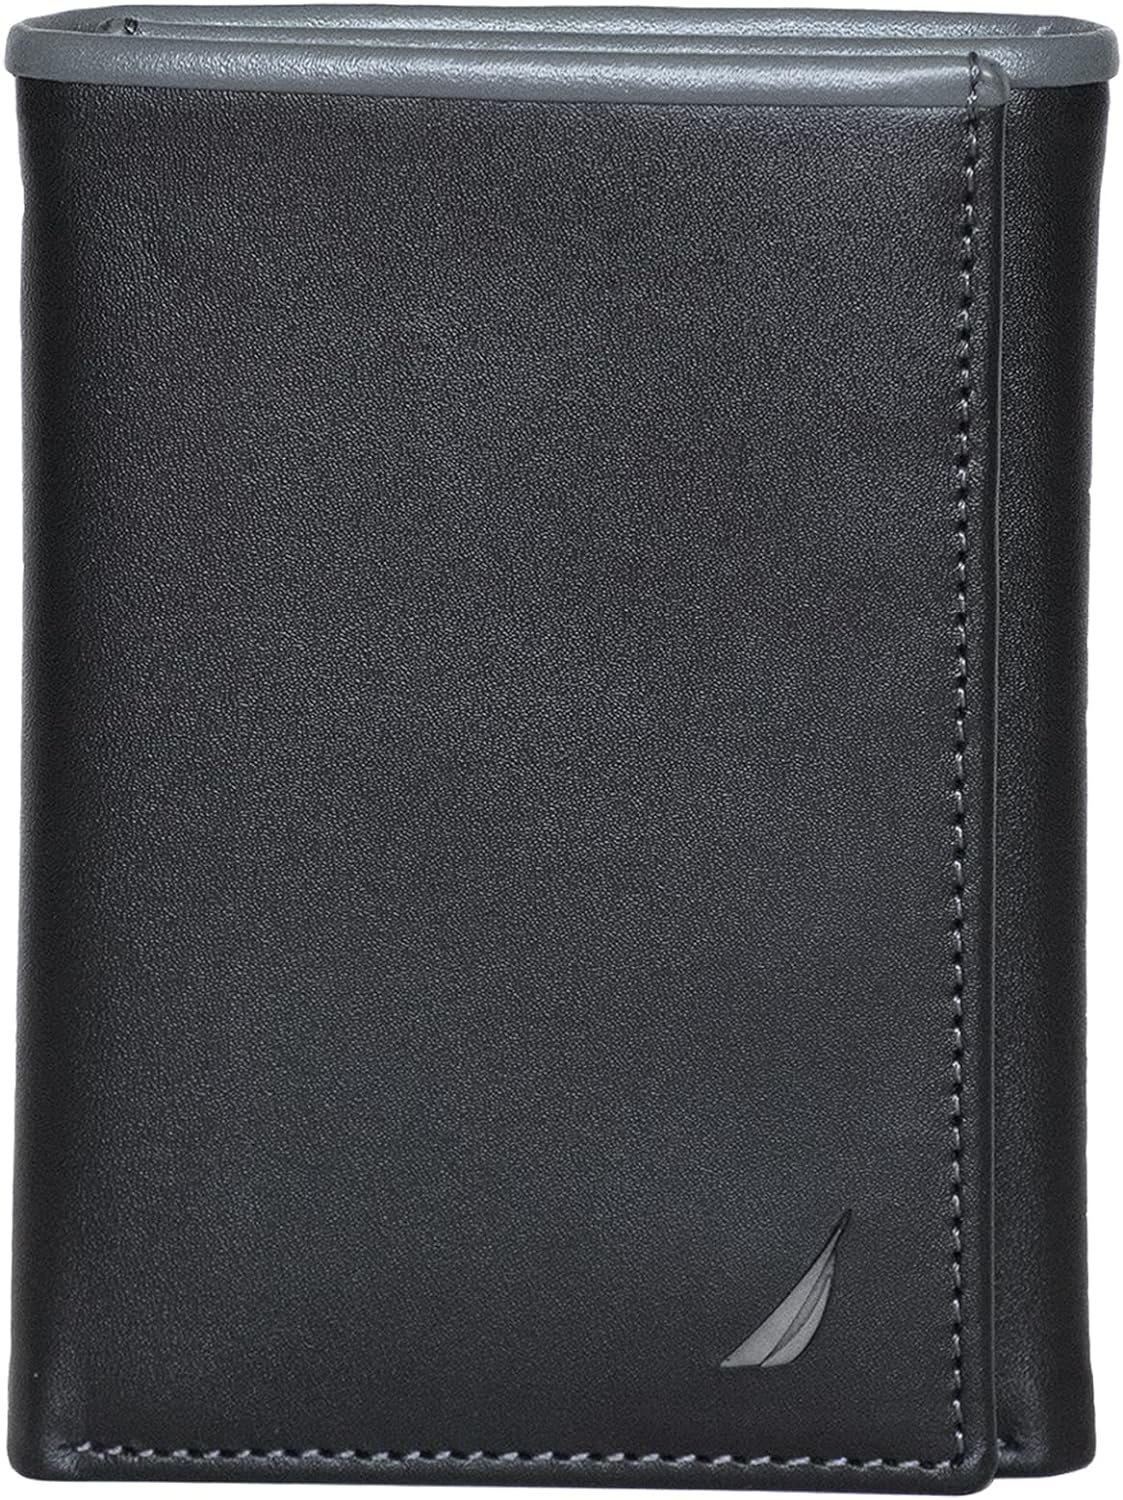 Nautica Men’s Classic Leather Trifold RFID Wallet Review